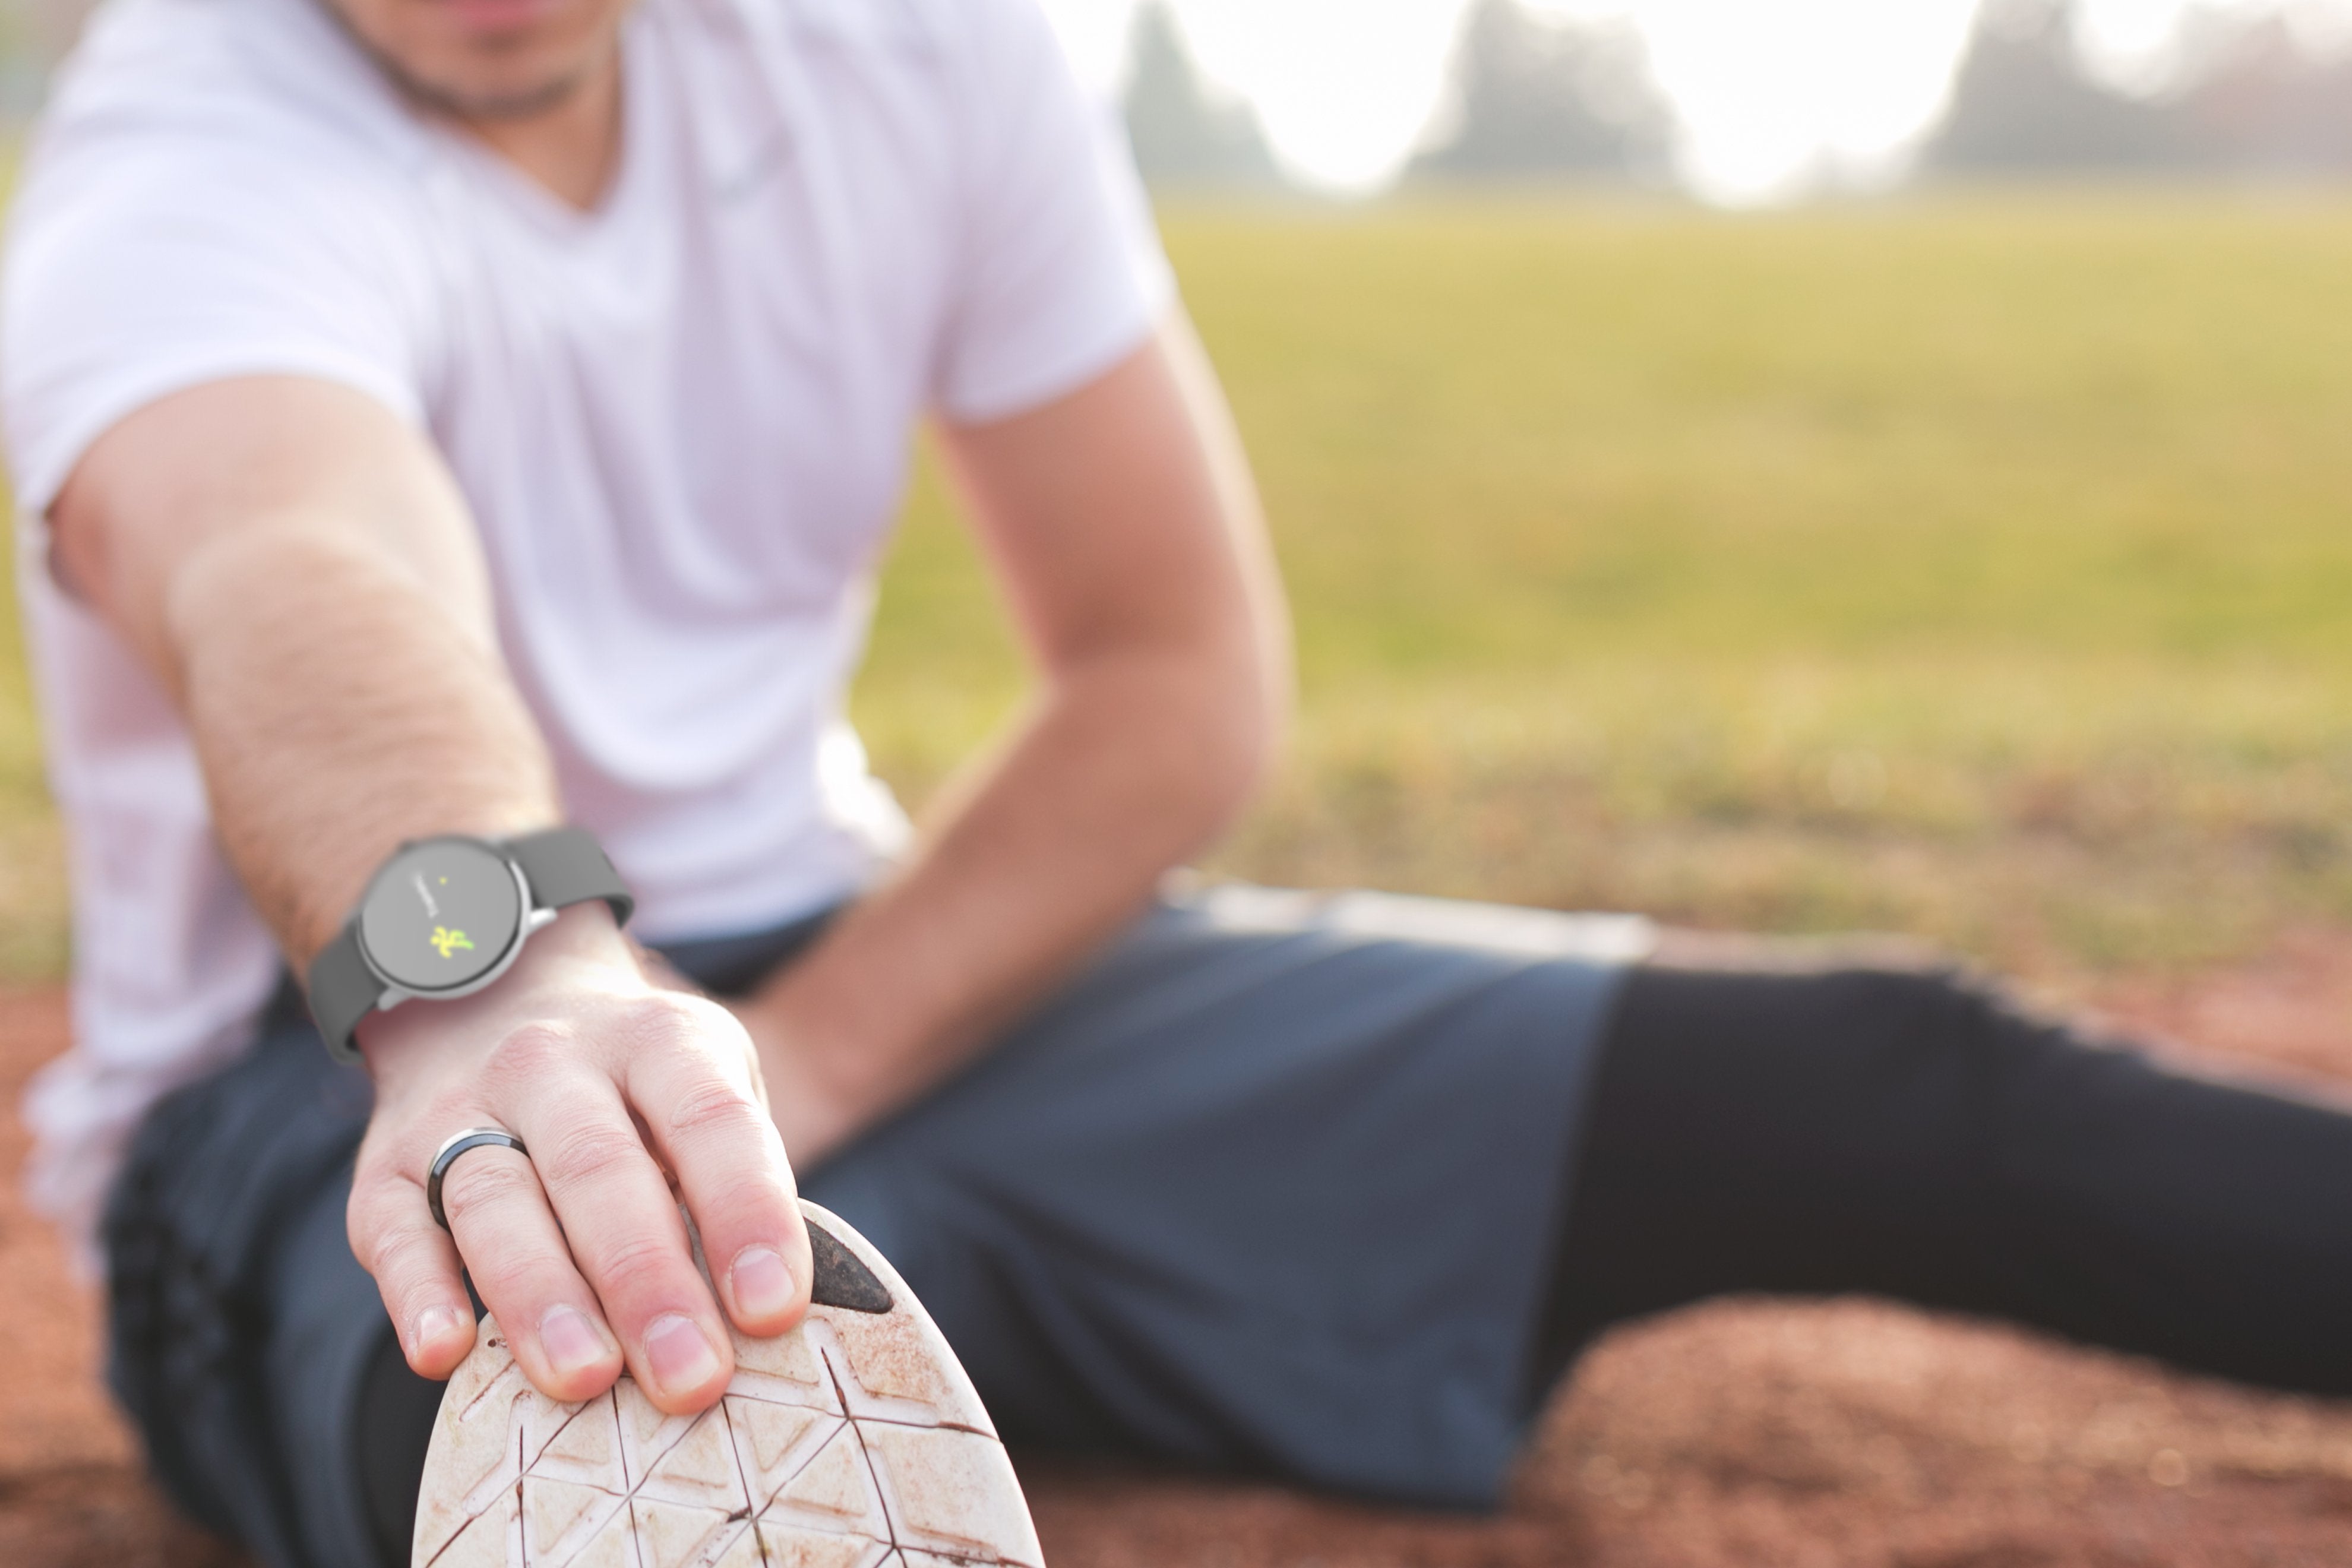 7 Reasons Why You Should Get a Fitness Tracker for Your Healthy Lifestyle by OAXIS